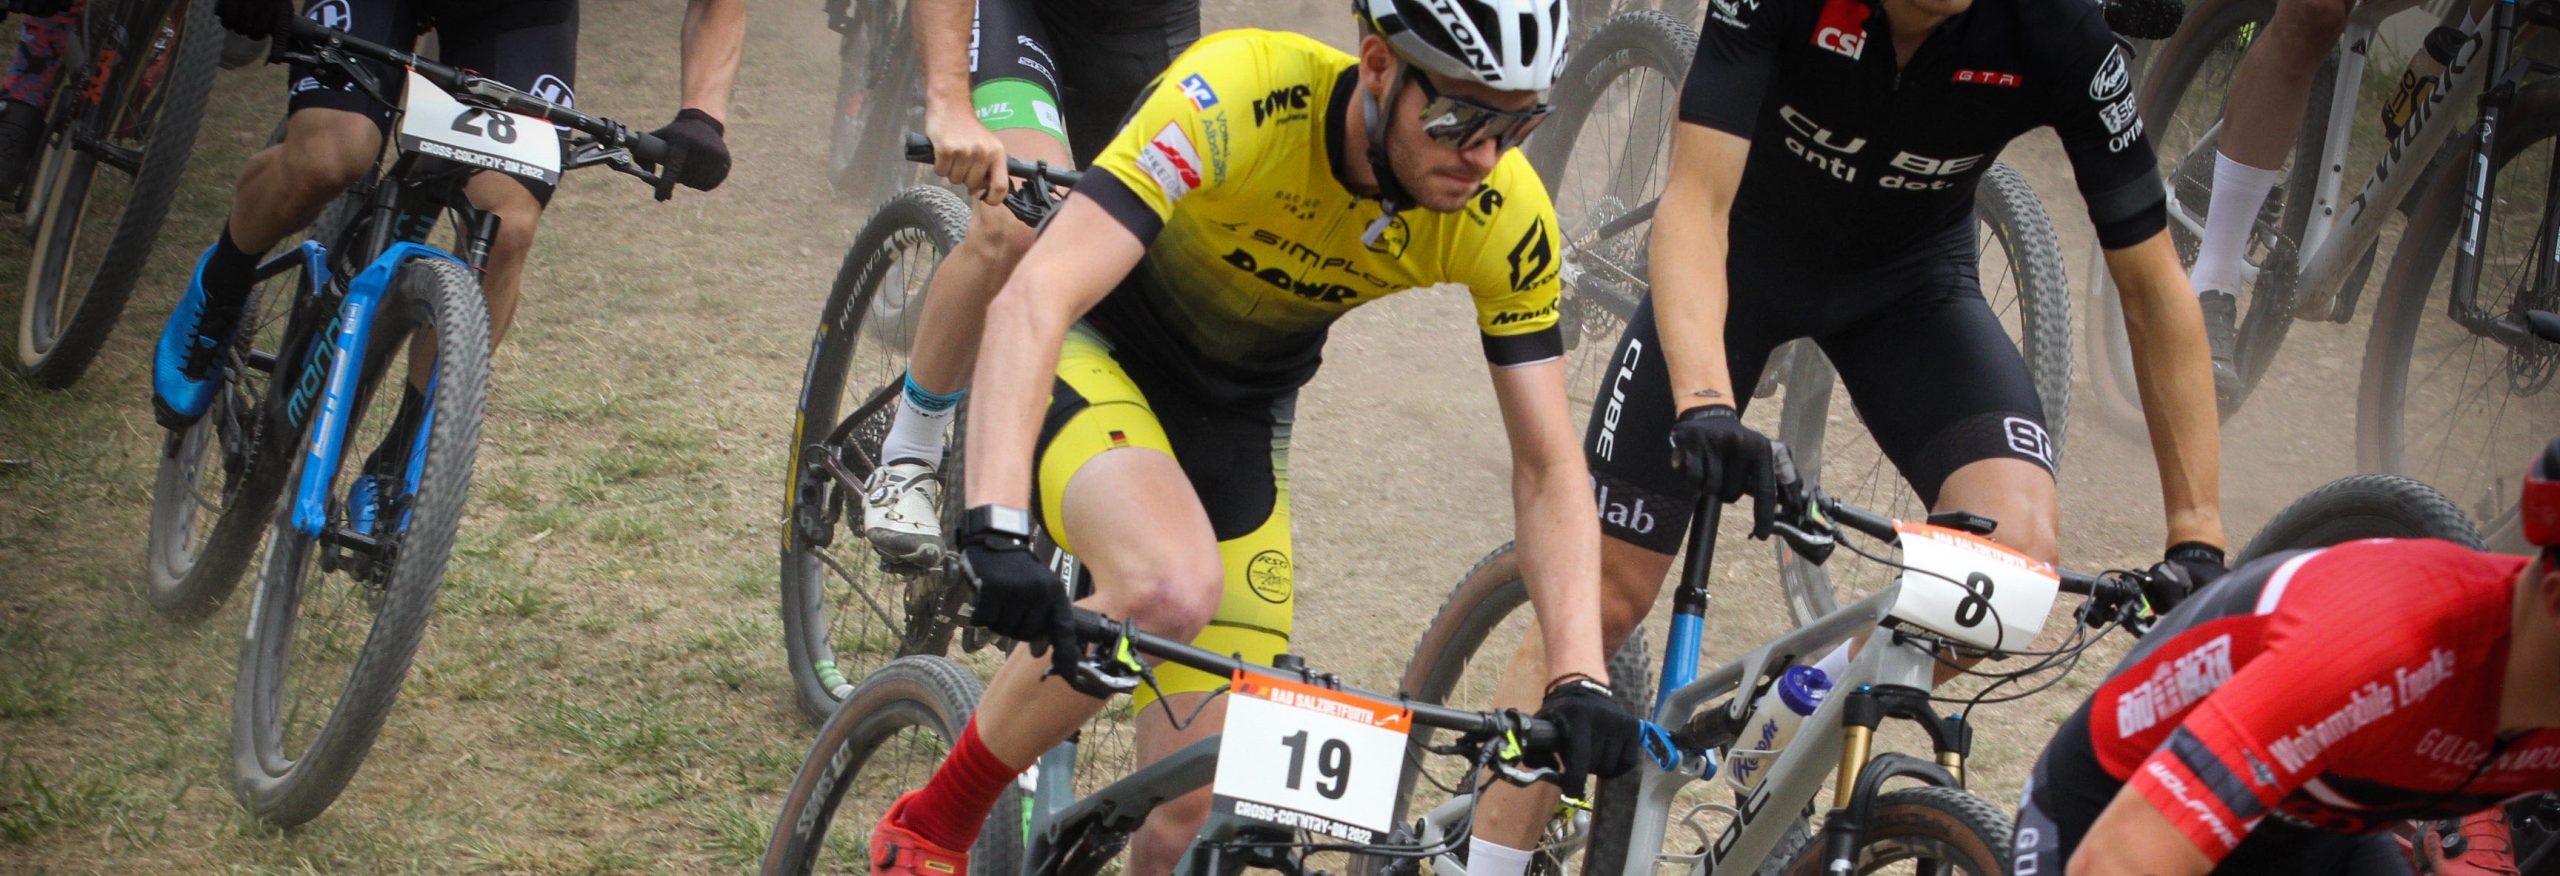 Team DOWE SIMPLON satisfied and successful at the DM in Bad Salzdetfurth